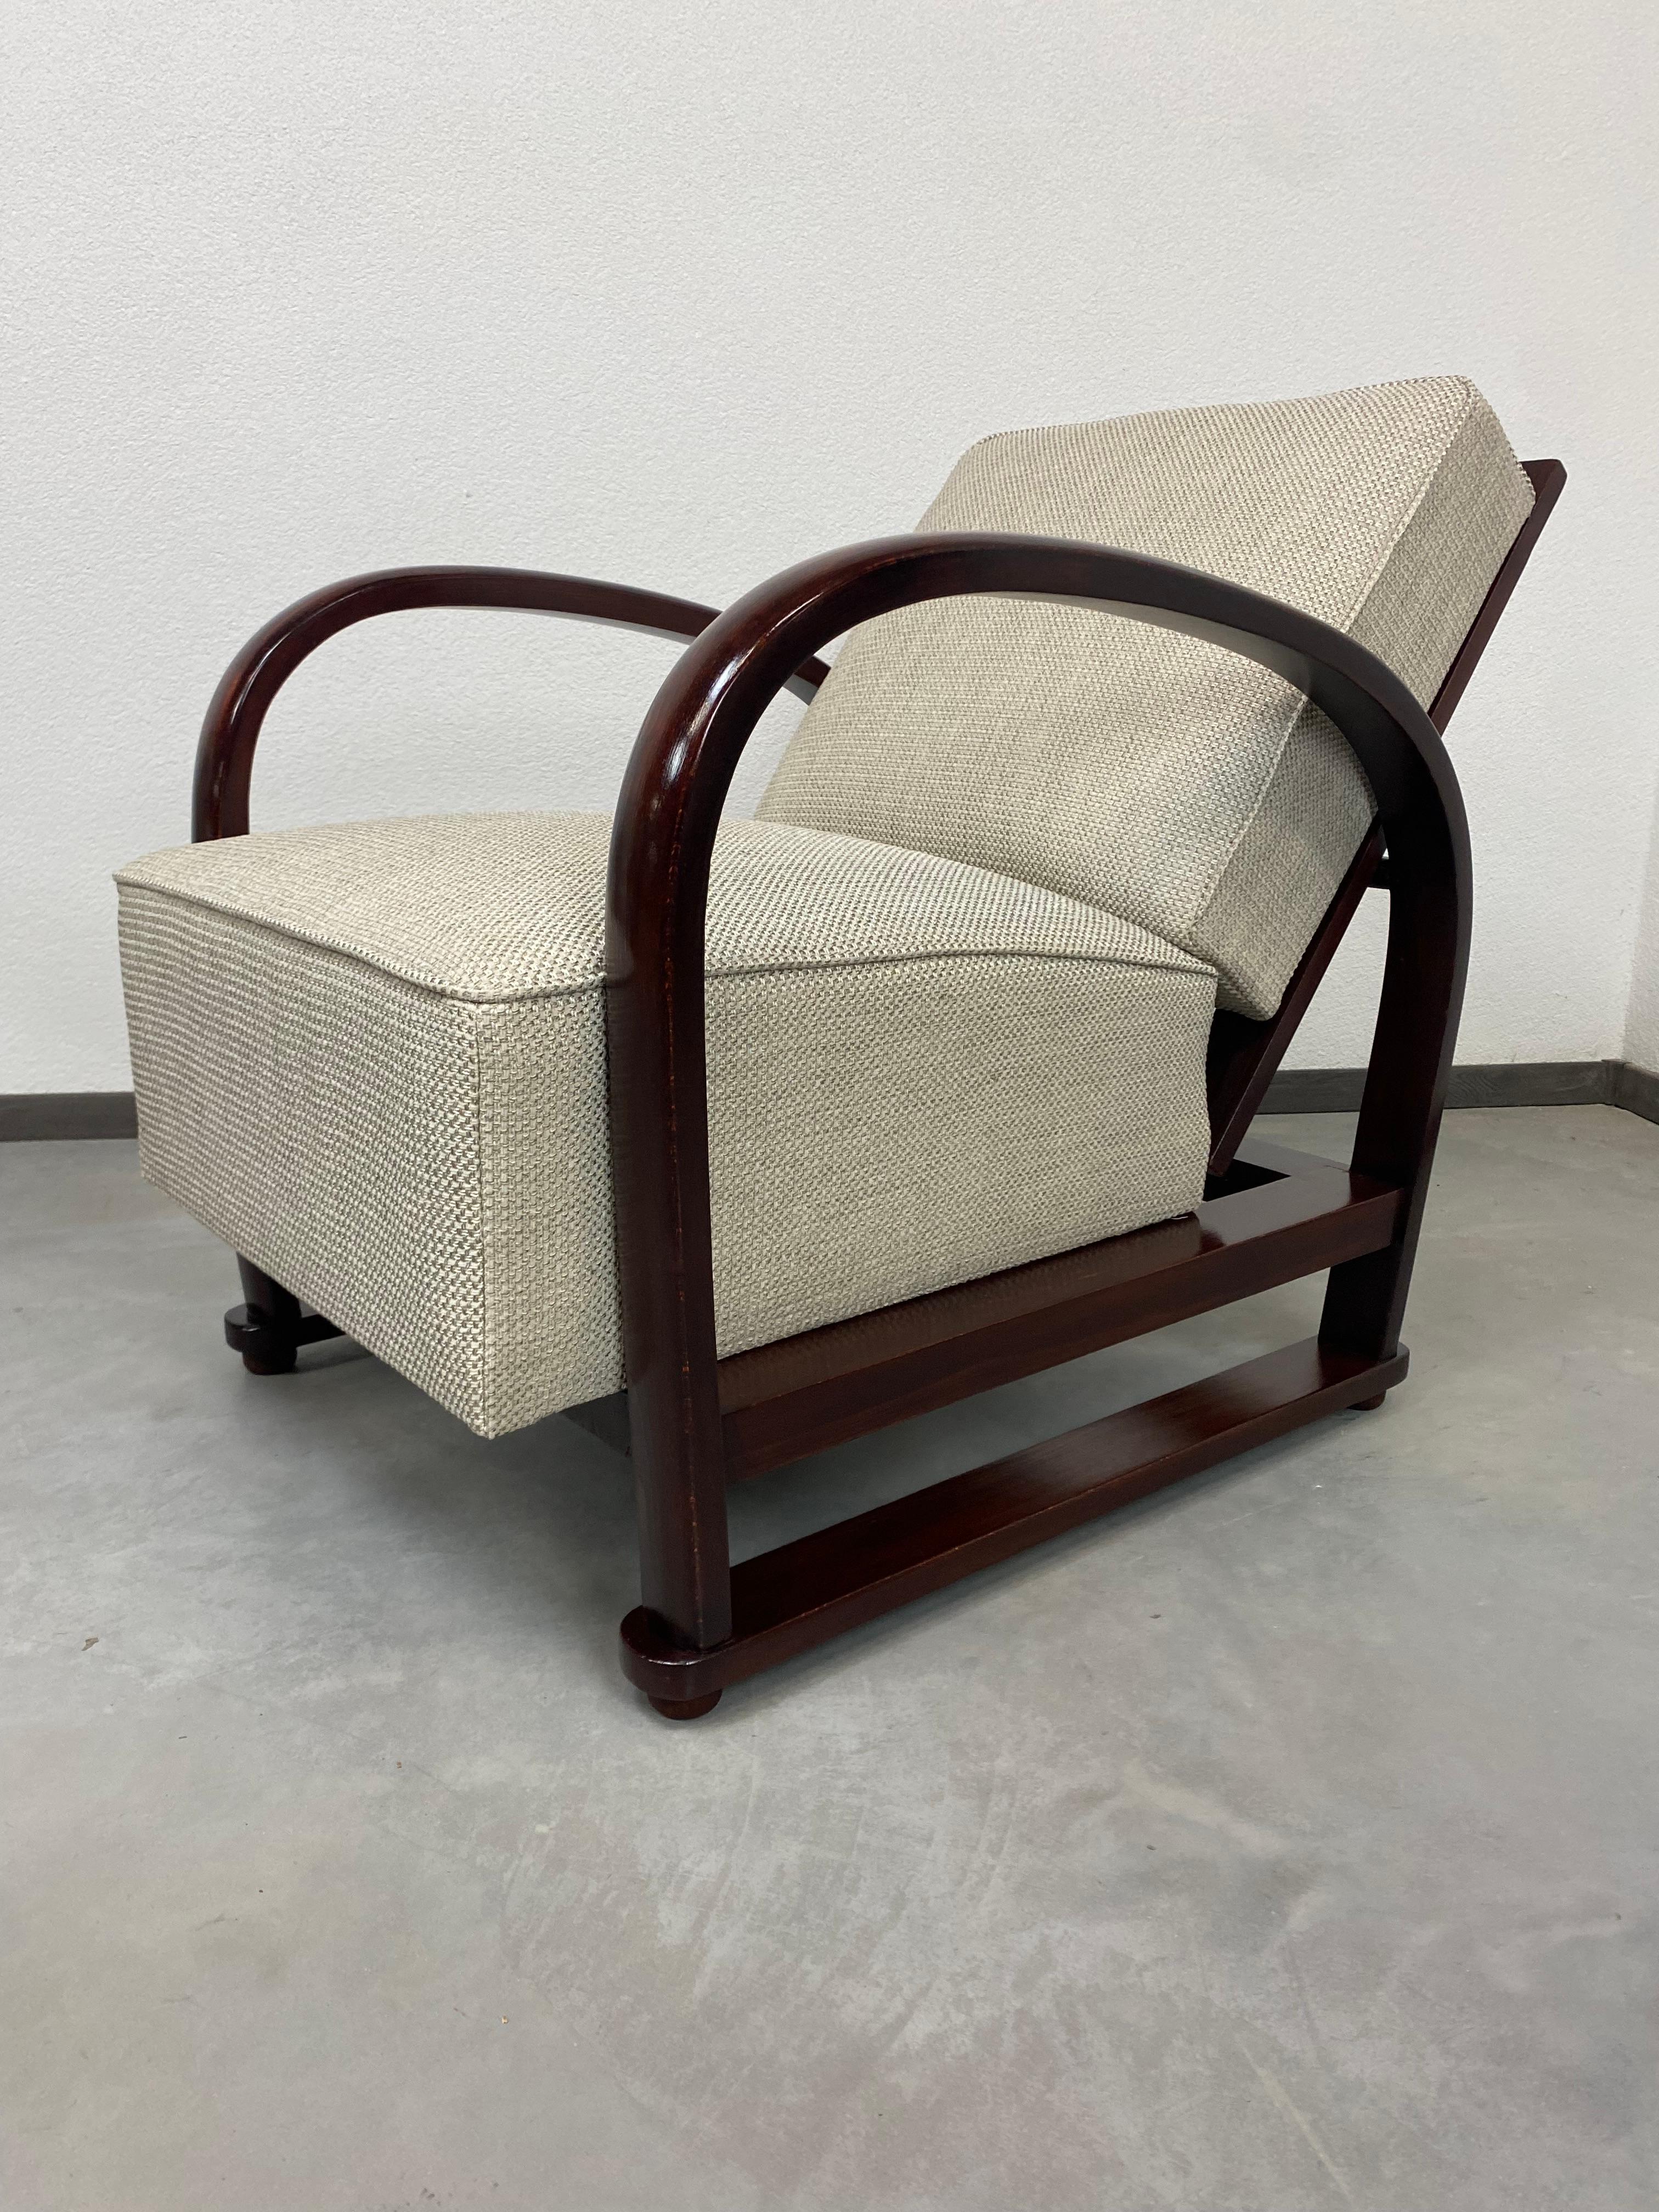 Very Rare Secession Armchairs in Style of Wiener Werkstatte by Pancota Vienna 1